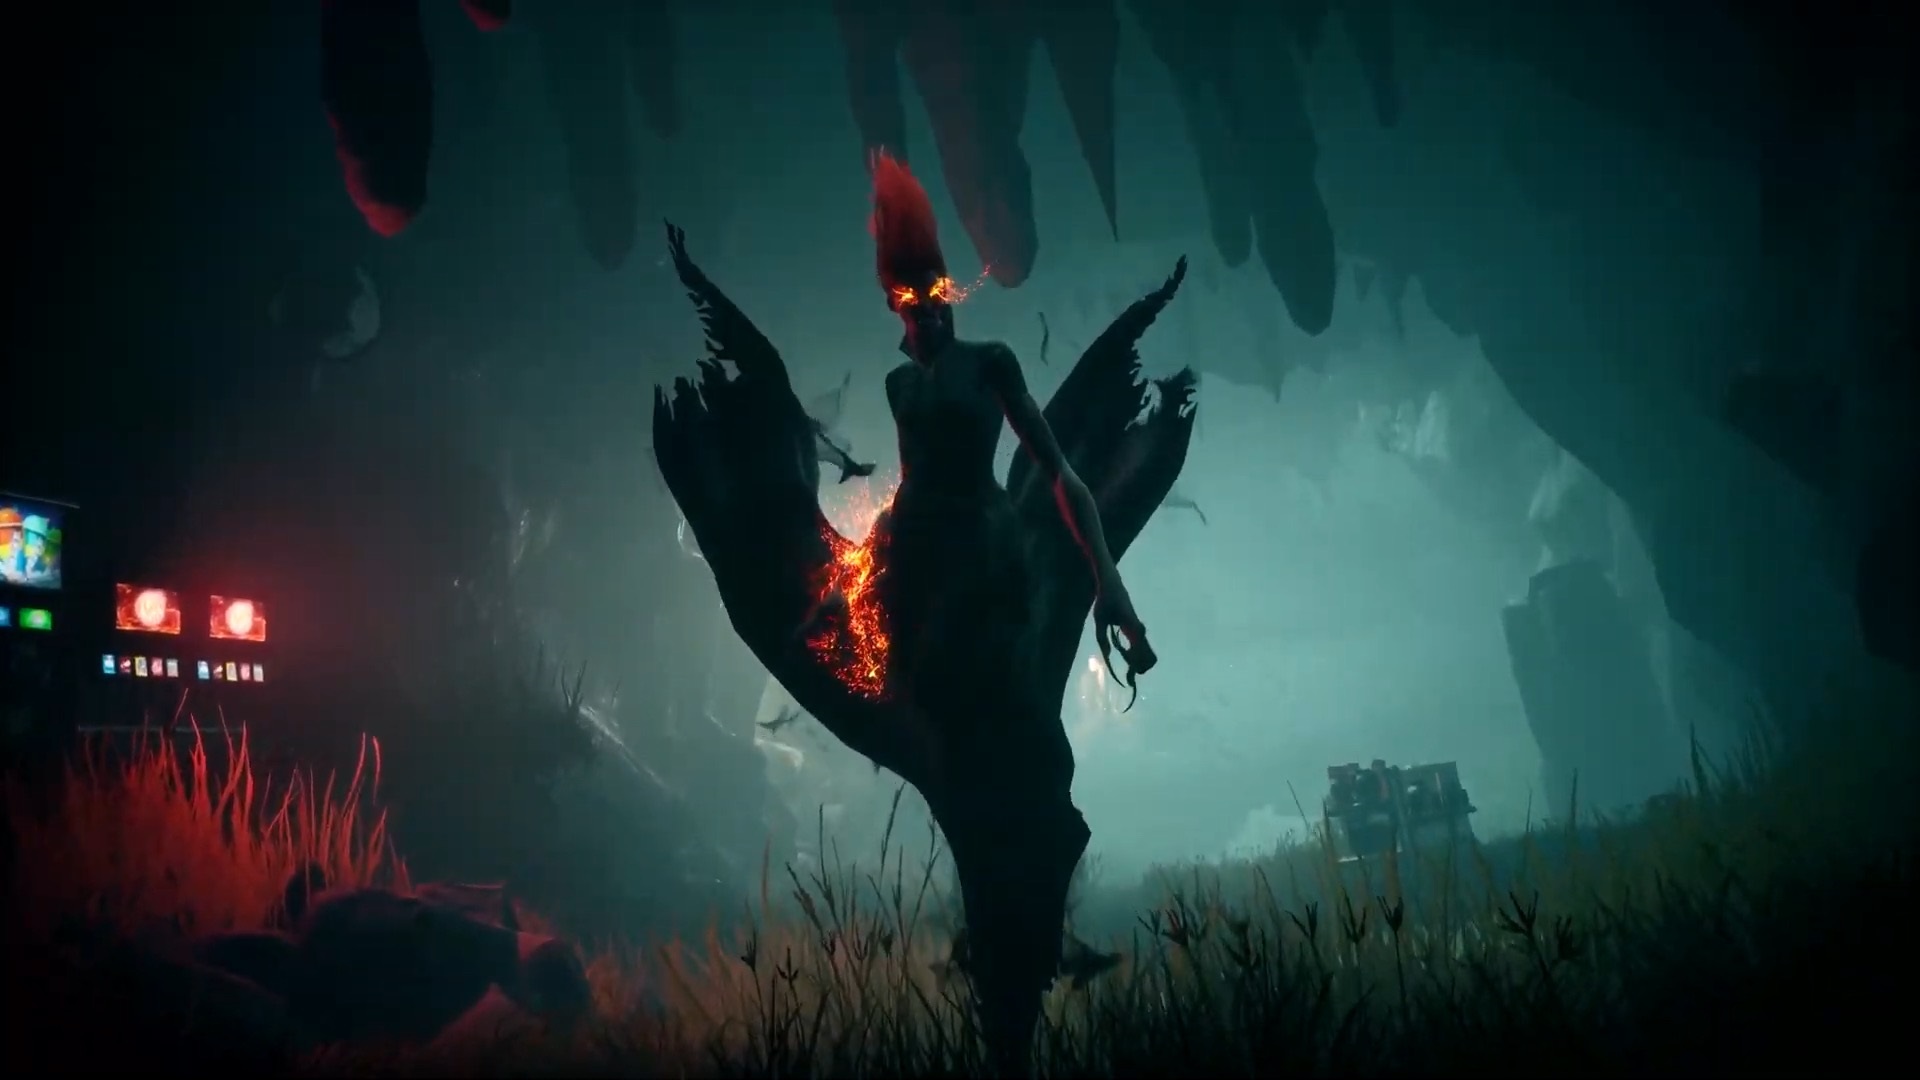 Redfall debuts a fiveminute gameplay trailer